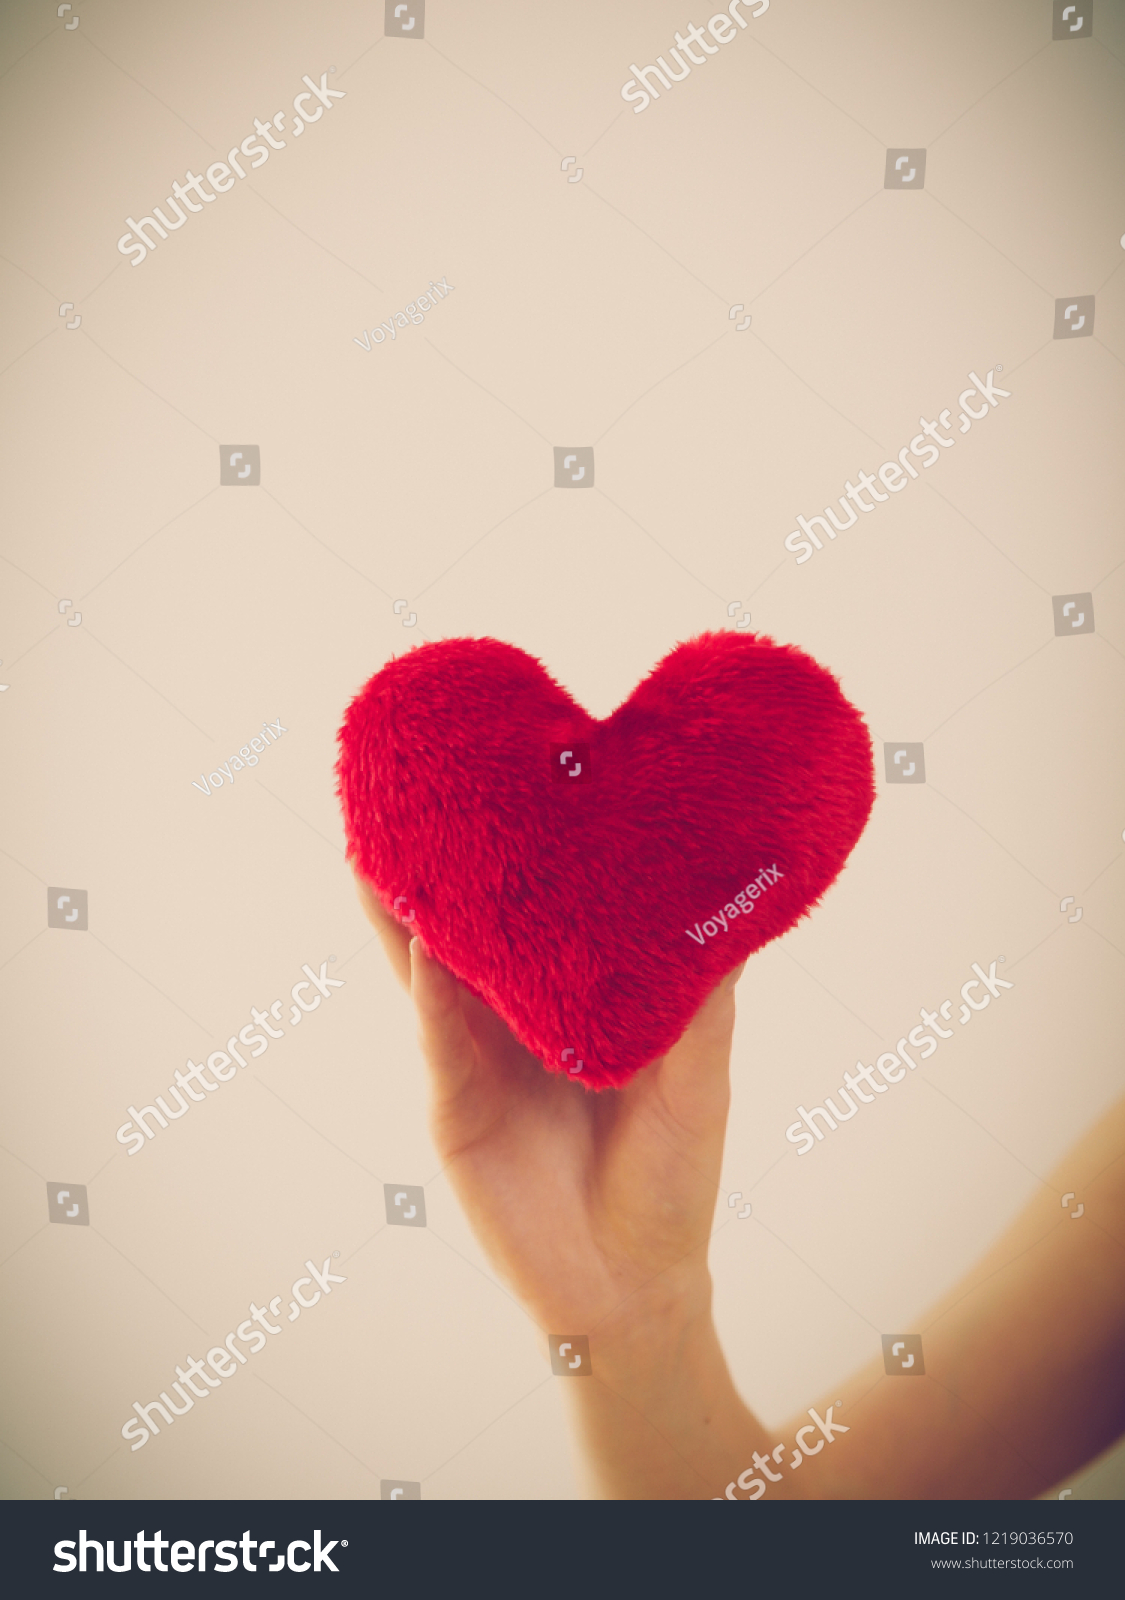 Woman hand holding small red heart shaped heart. Cardiology and healthcare concept. Valentines day gift. #1219036570